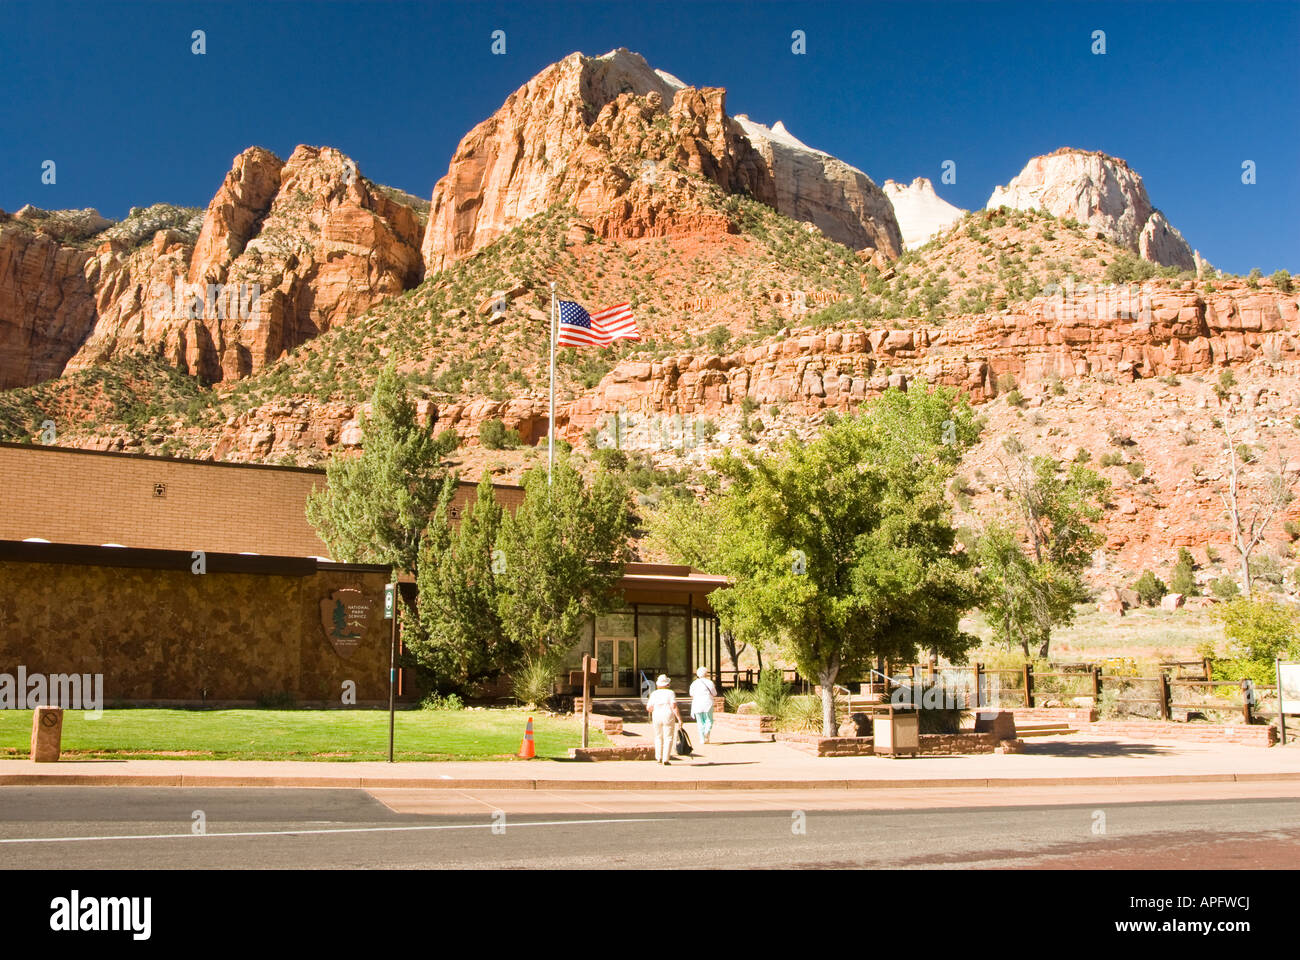 Visitors entering the Human History Museum in Zion National Park in southwest Utah Sandstone formations in the background Stock Photo